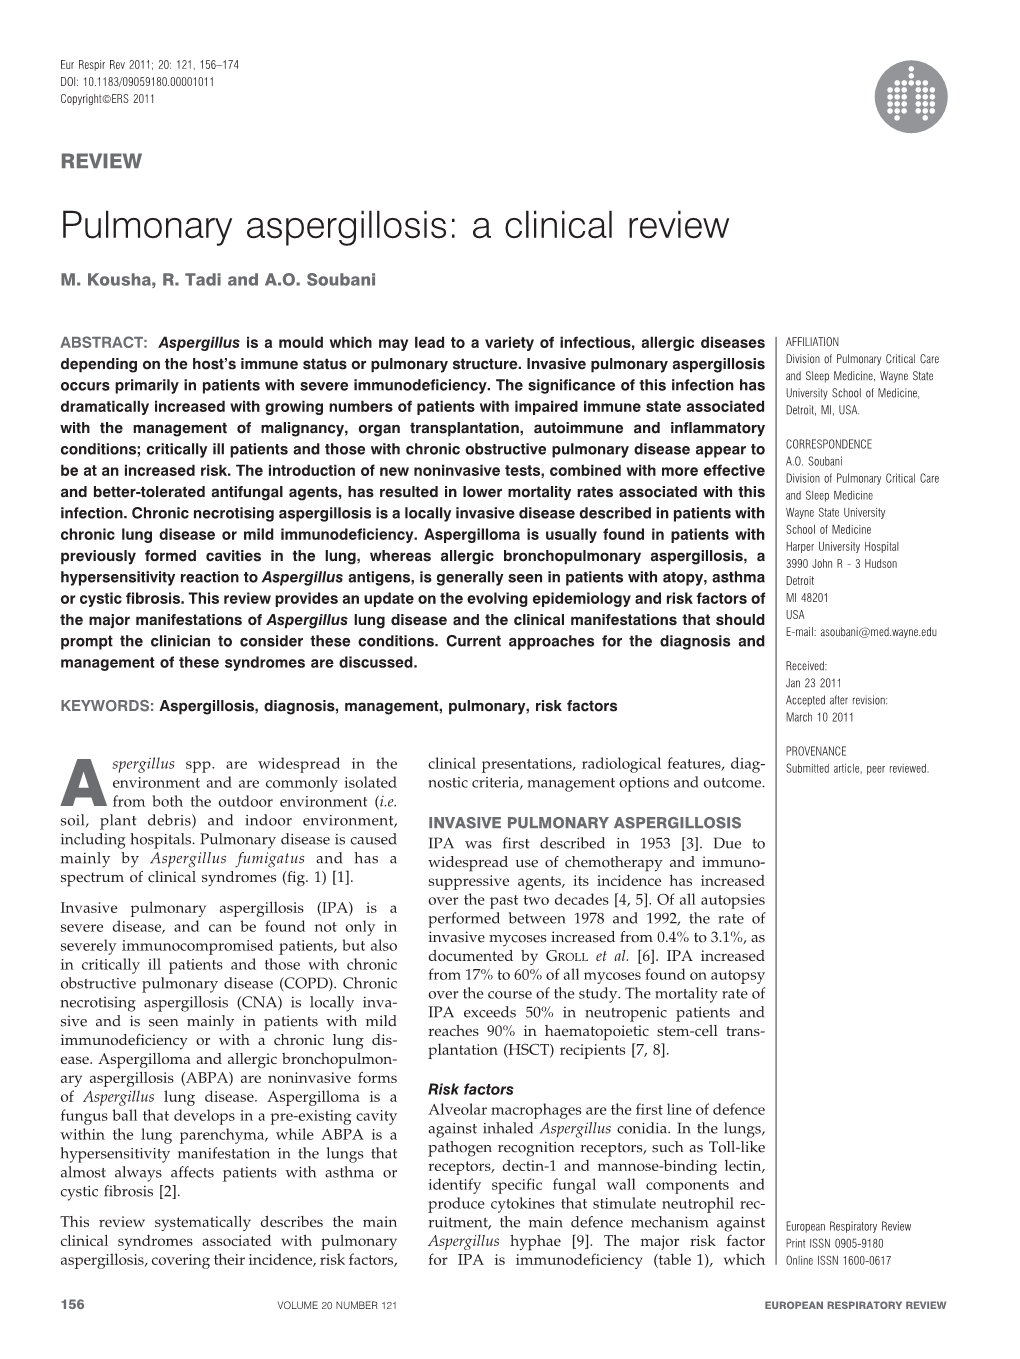 Pulmonary Aspergillosis: a Clinical Review